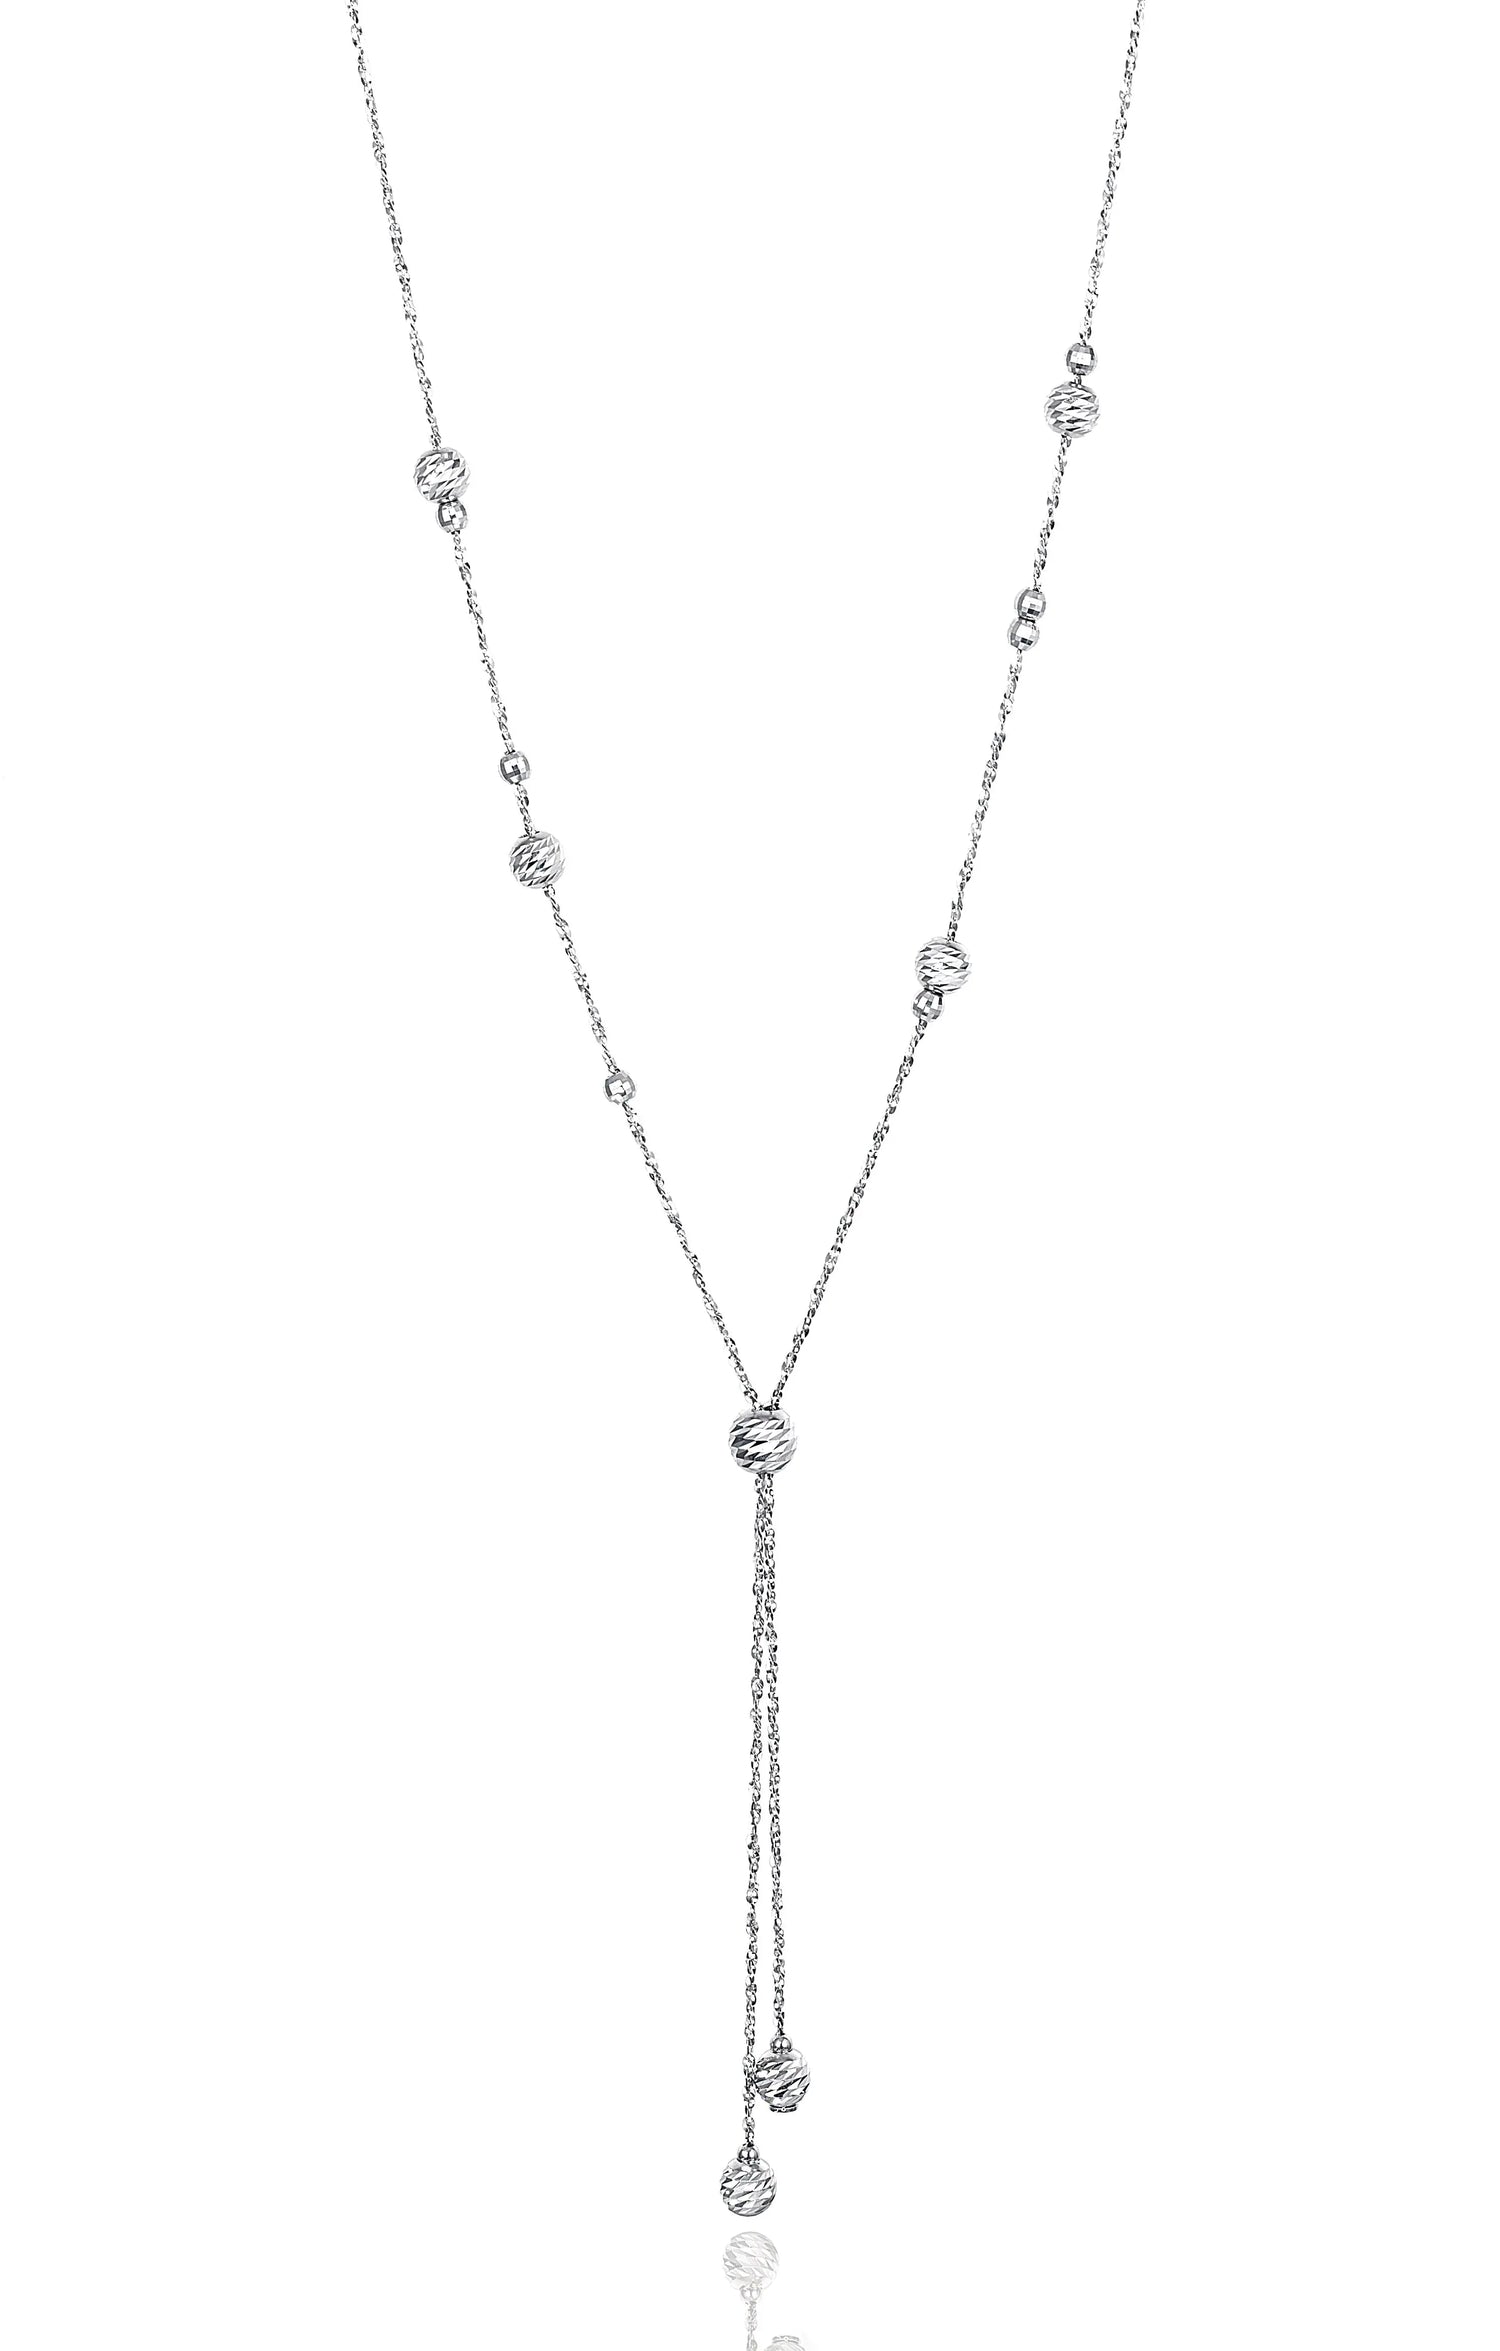 Art in motion. Floating platinum beads slide effortlessly along a platinum chain to quickly change the look and configuration. A floating bead transforms this necklace from an elegant choker to a dramatic Y-shaped necklace.  Product Details:  Platinum No Clasp Adjustable length 30" If an item is out of stock, please allow 3-6 weeks for delivery